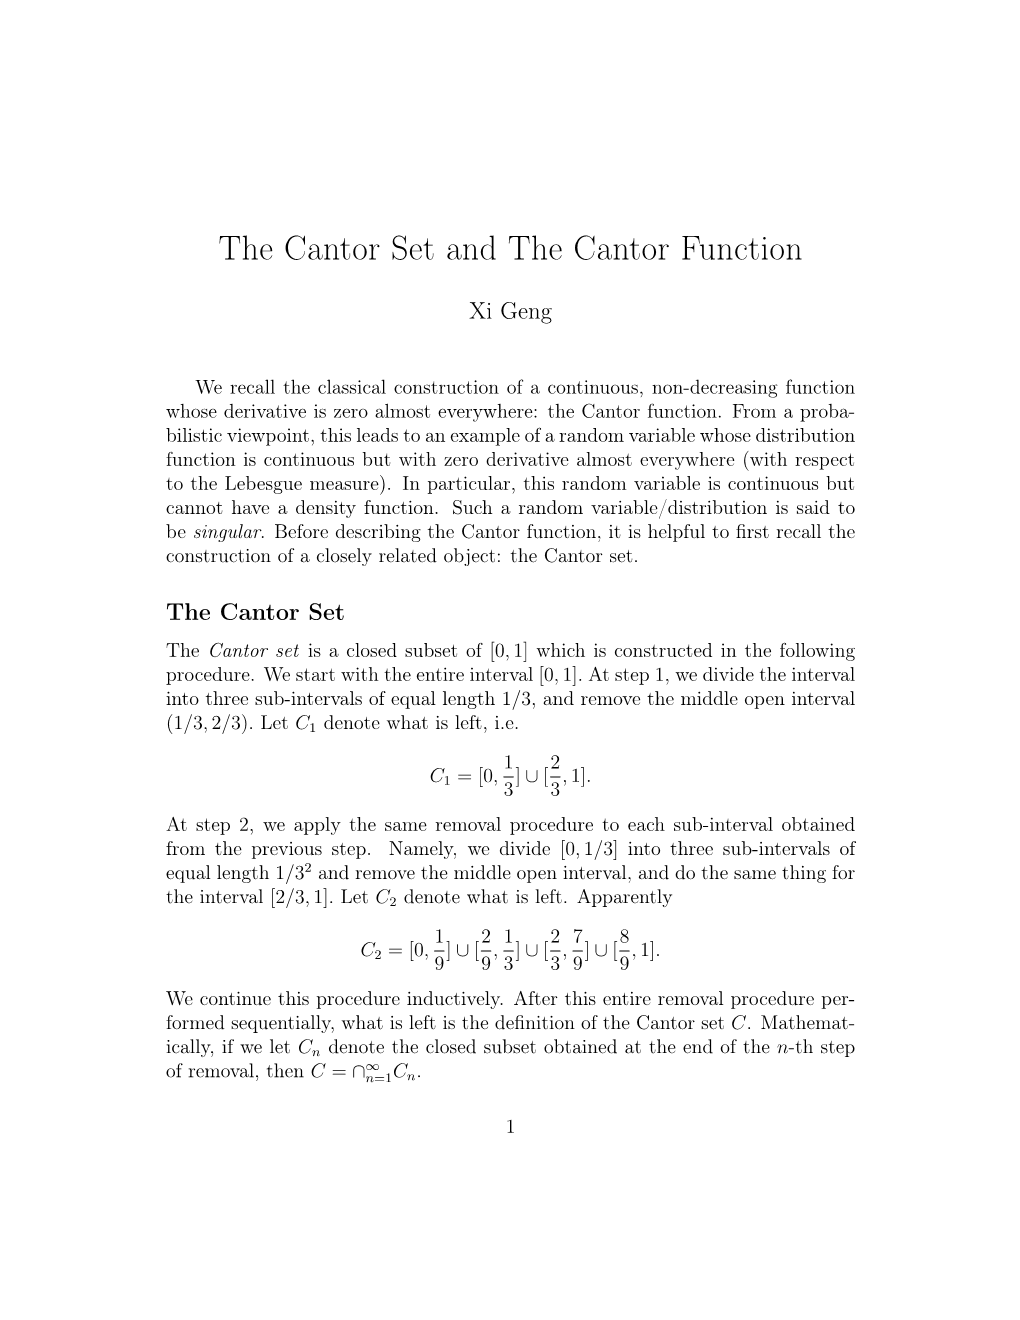 The Cantor Function and the Cantor